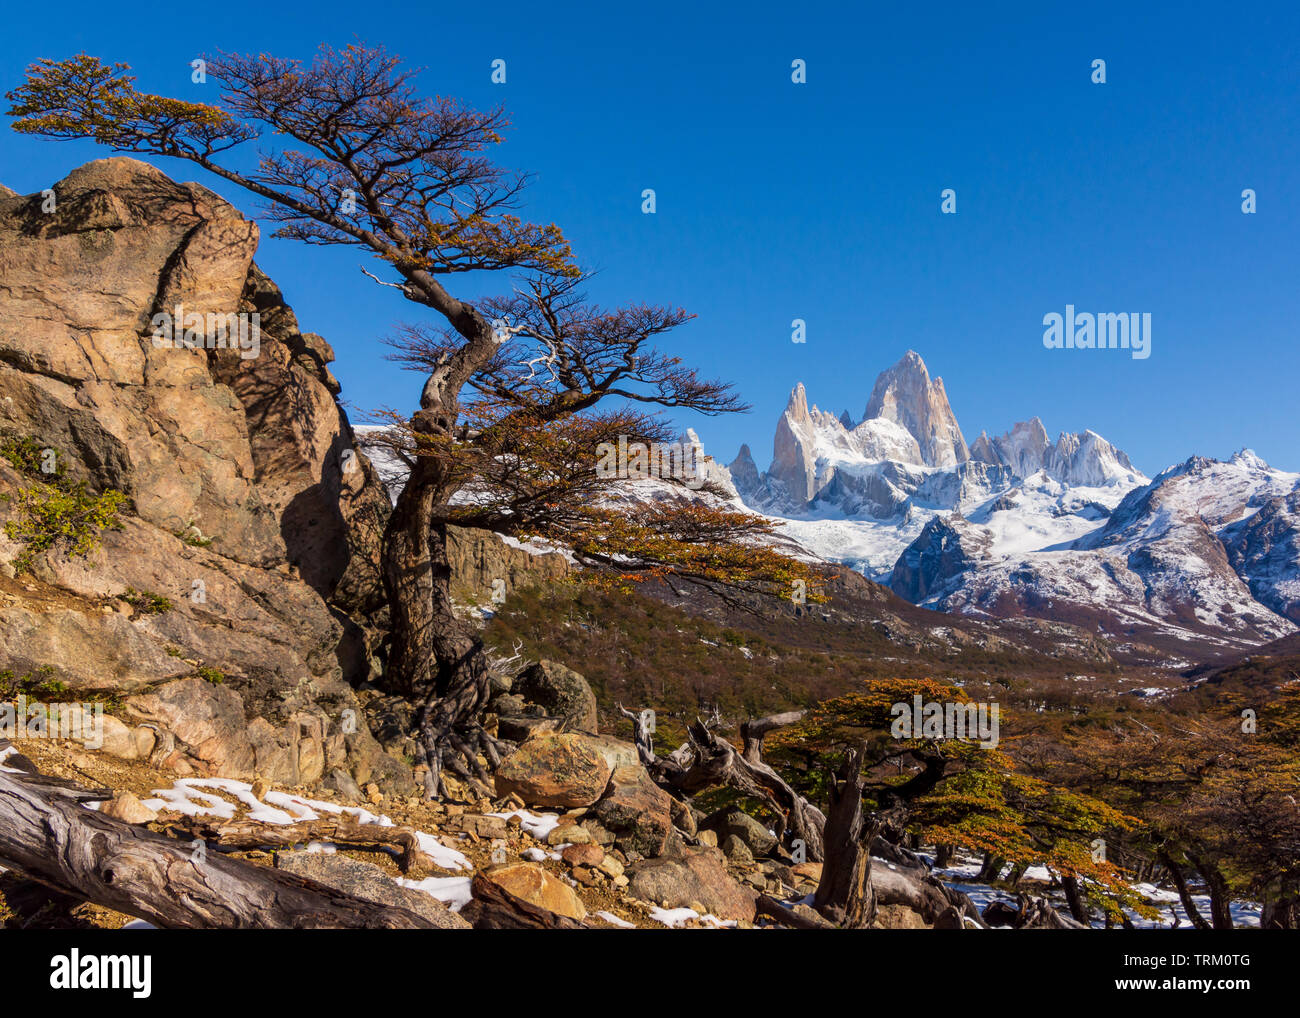 A view of the Fitz Roy mountain, part of the Andean mountain range outside the town of El Chalten in the Patagonia region of Argentina. Stock Photo